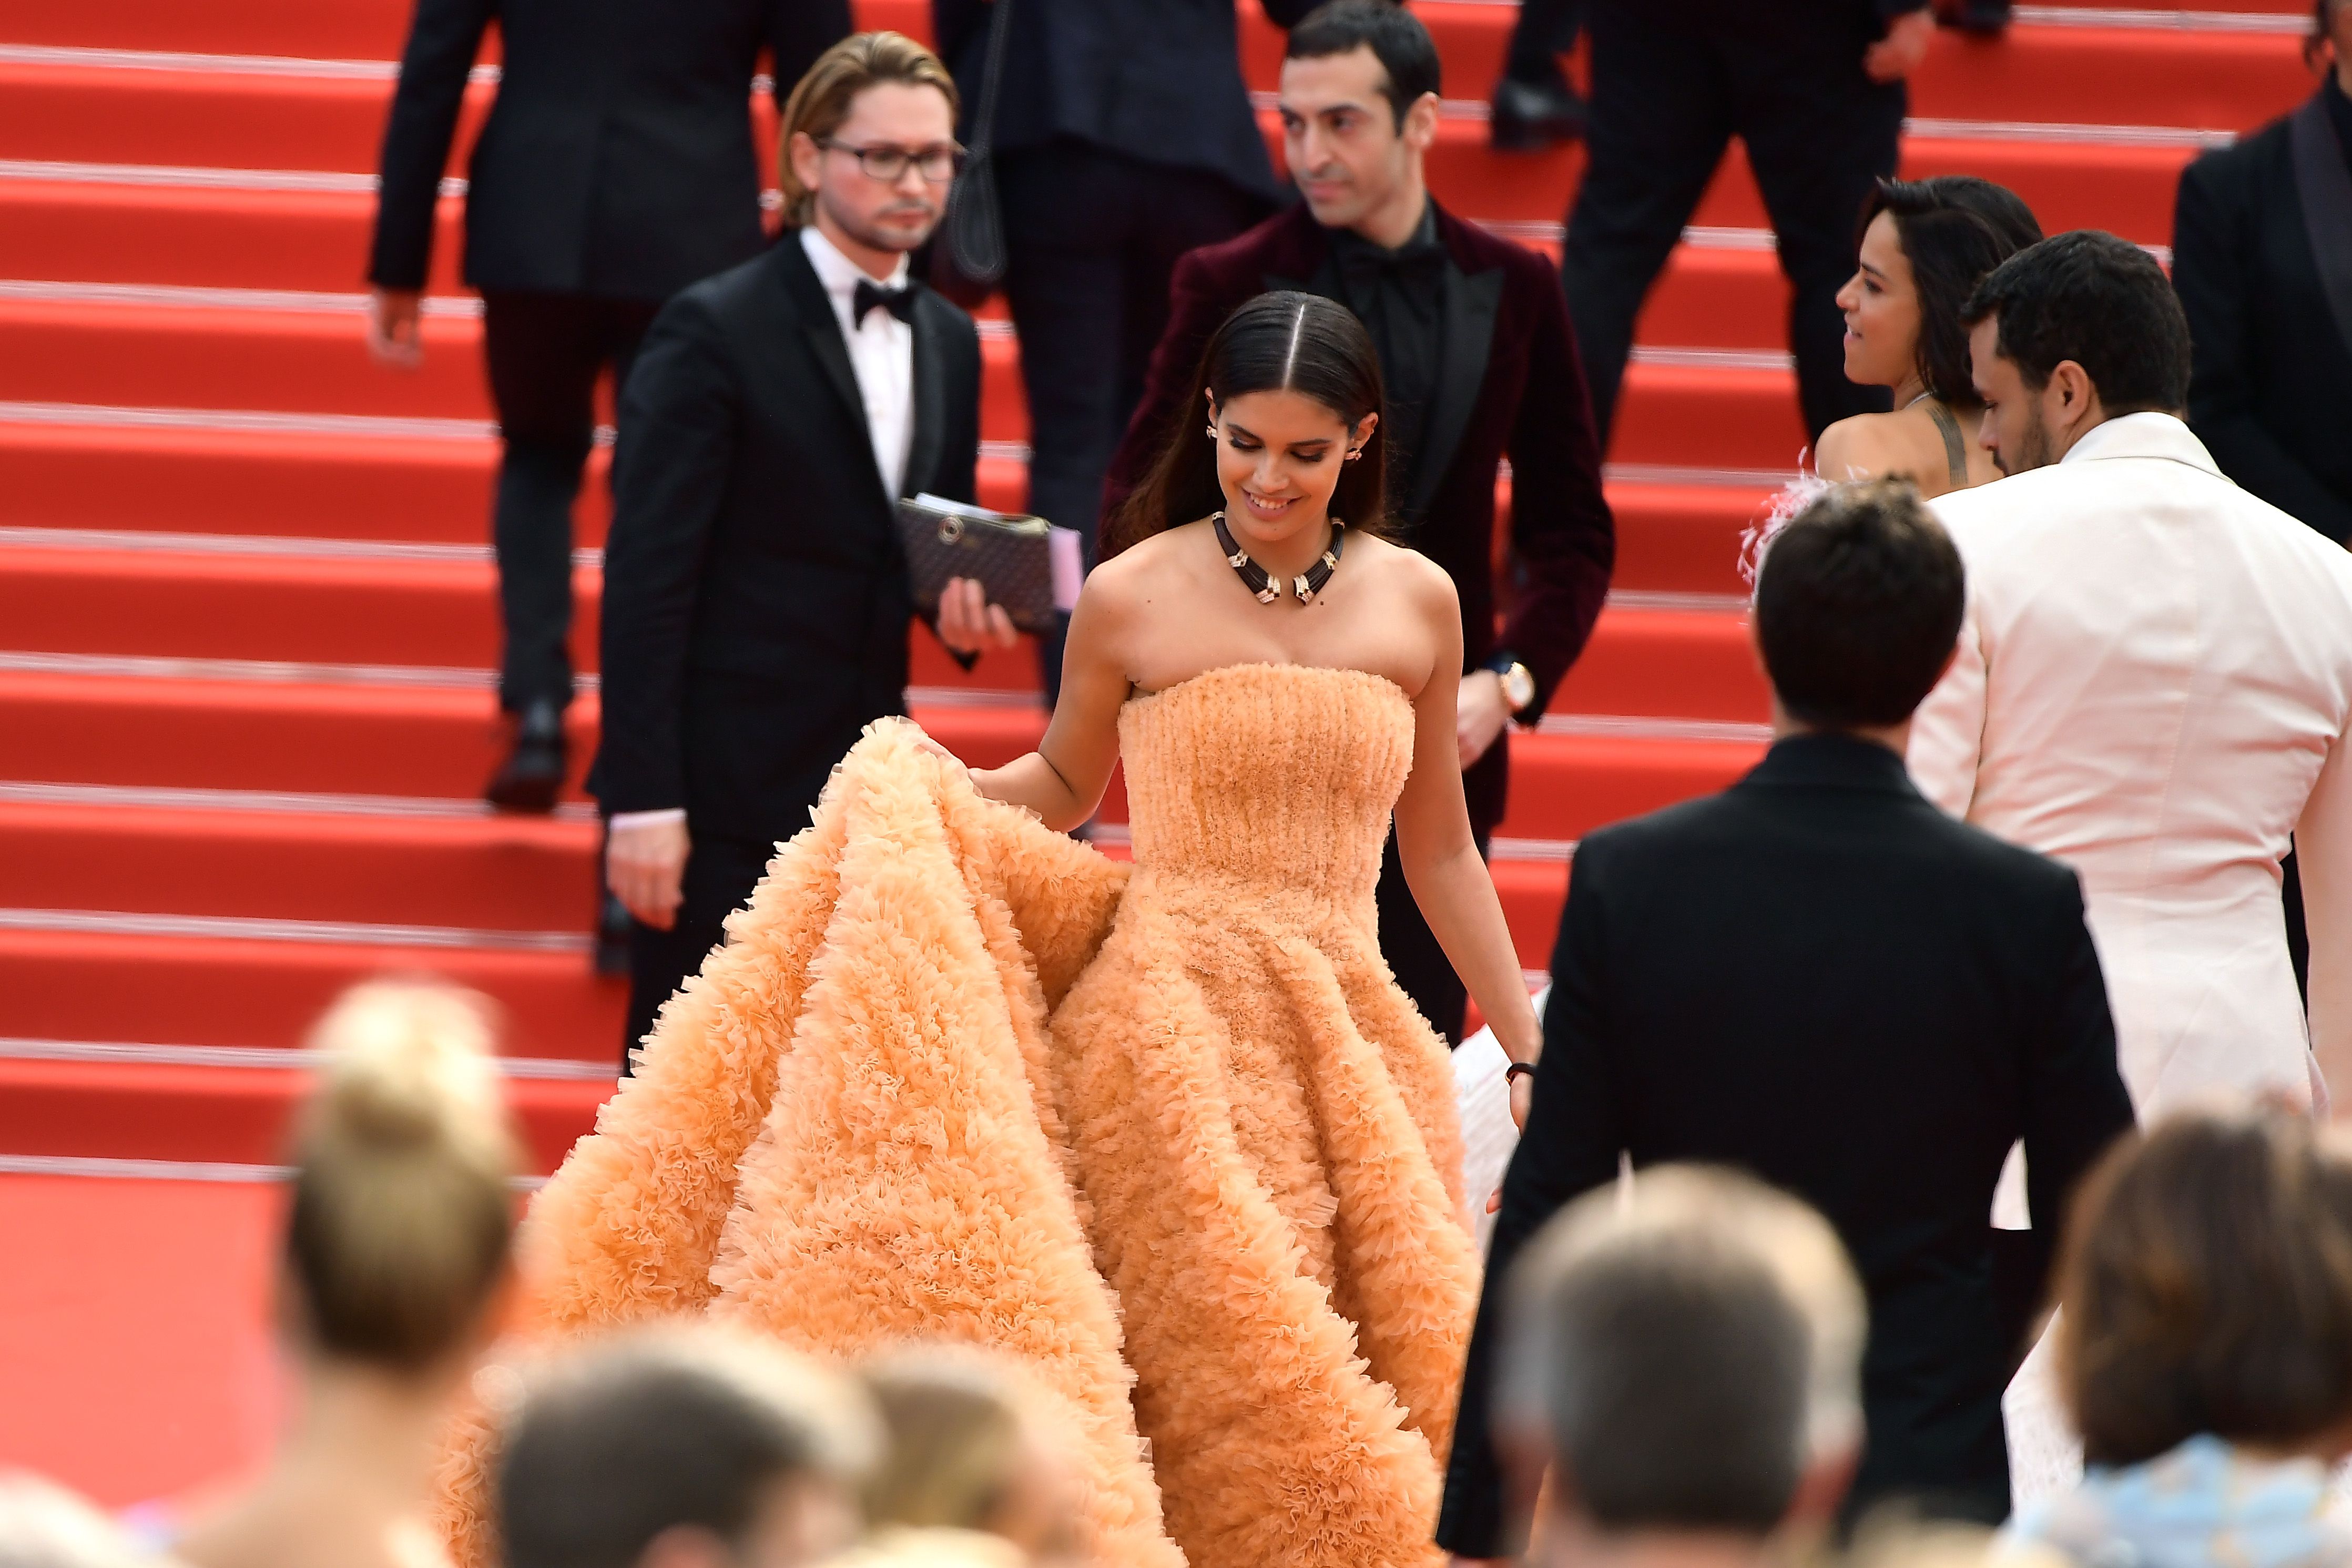 The Best Dressed Stars at the 2019 Cannes Film Festival